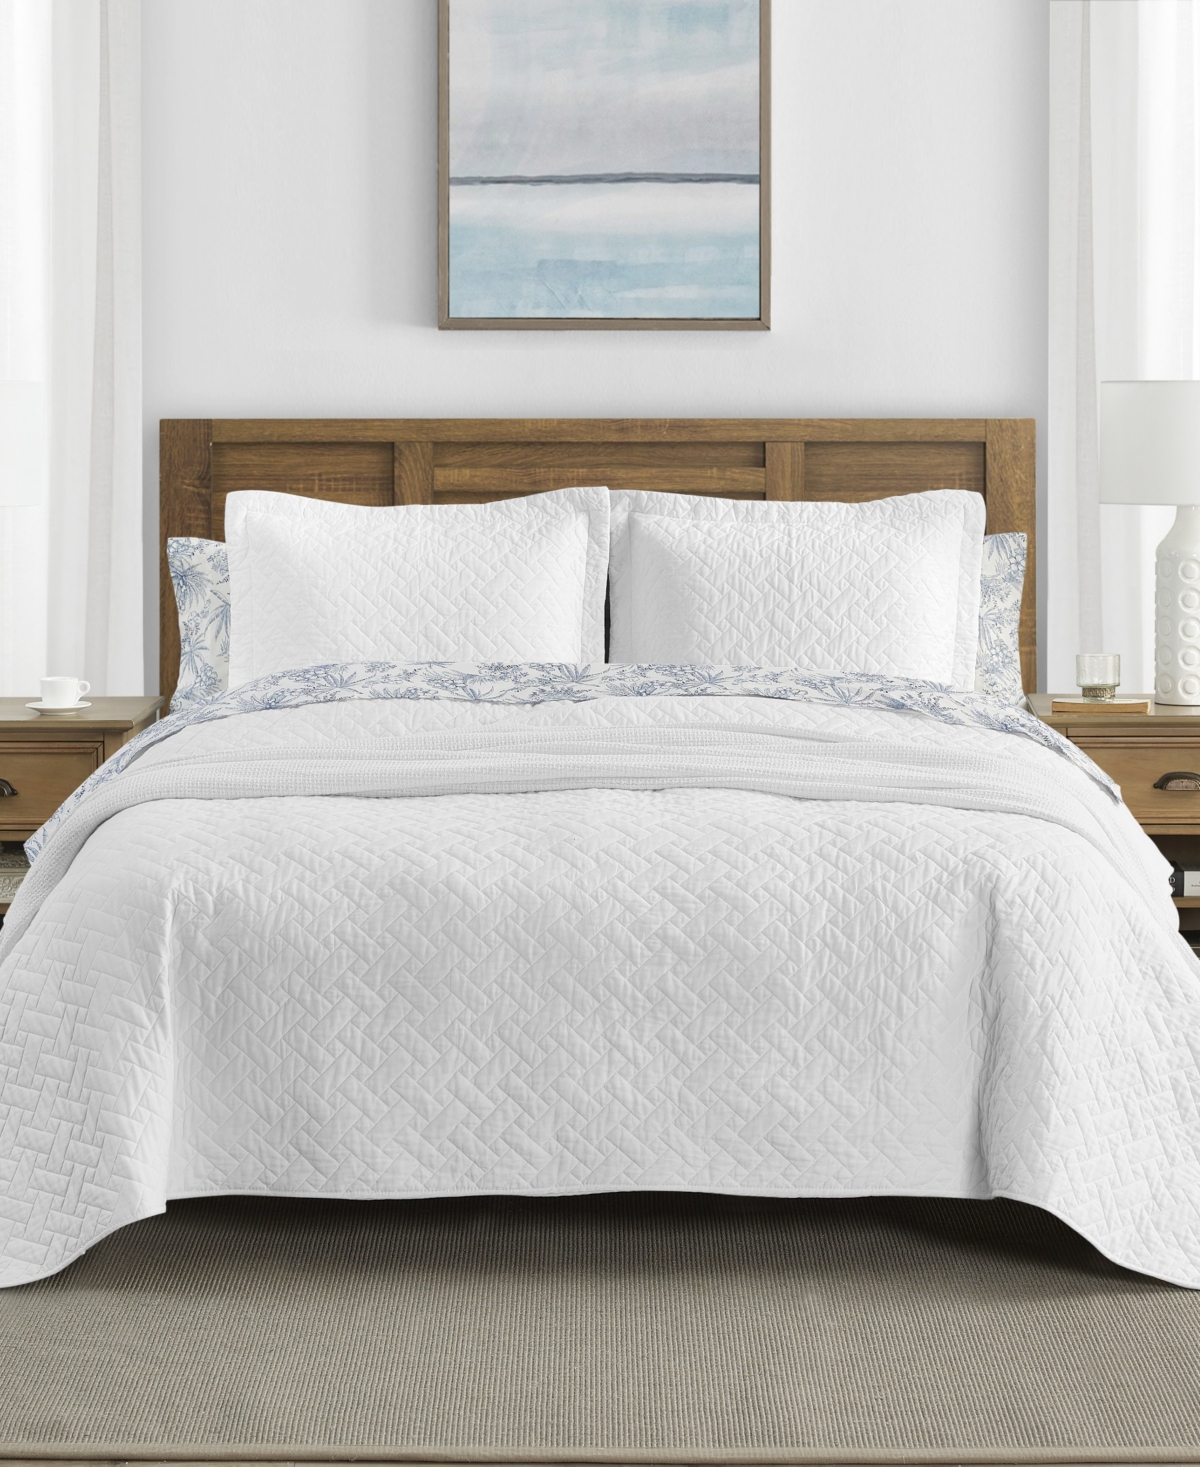 UPC 883893684942 product image for Tommy Bahama Solid Raffia Quilt Set, Twin Bedding | upcitemdb.com